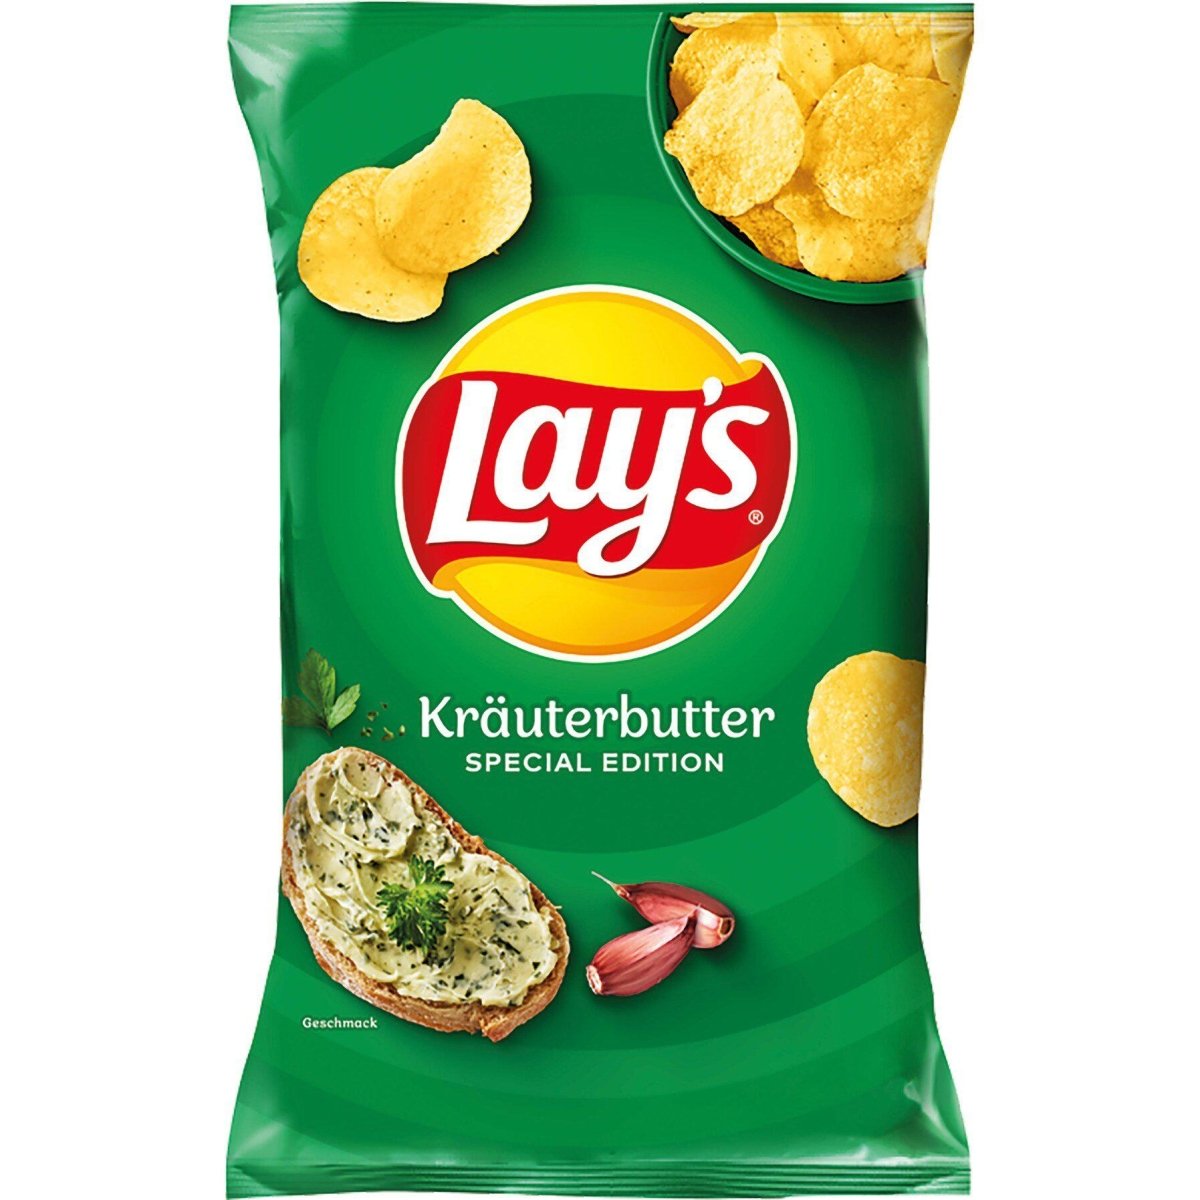 Lays Krauterbutter (Germany) 175g - Candy Mail UK